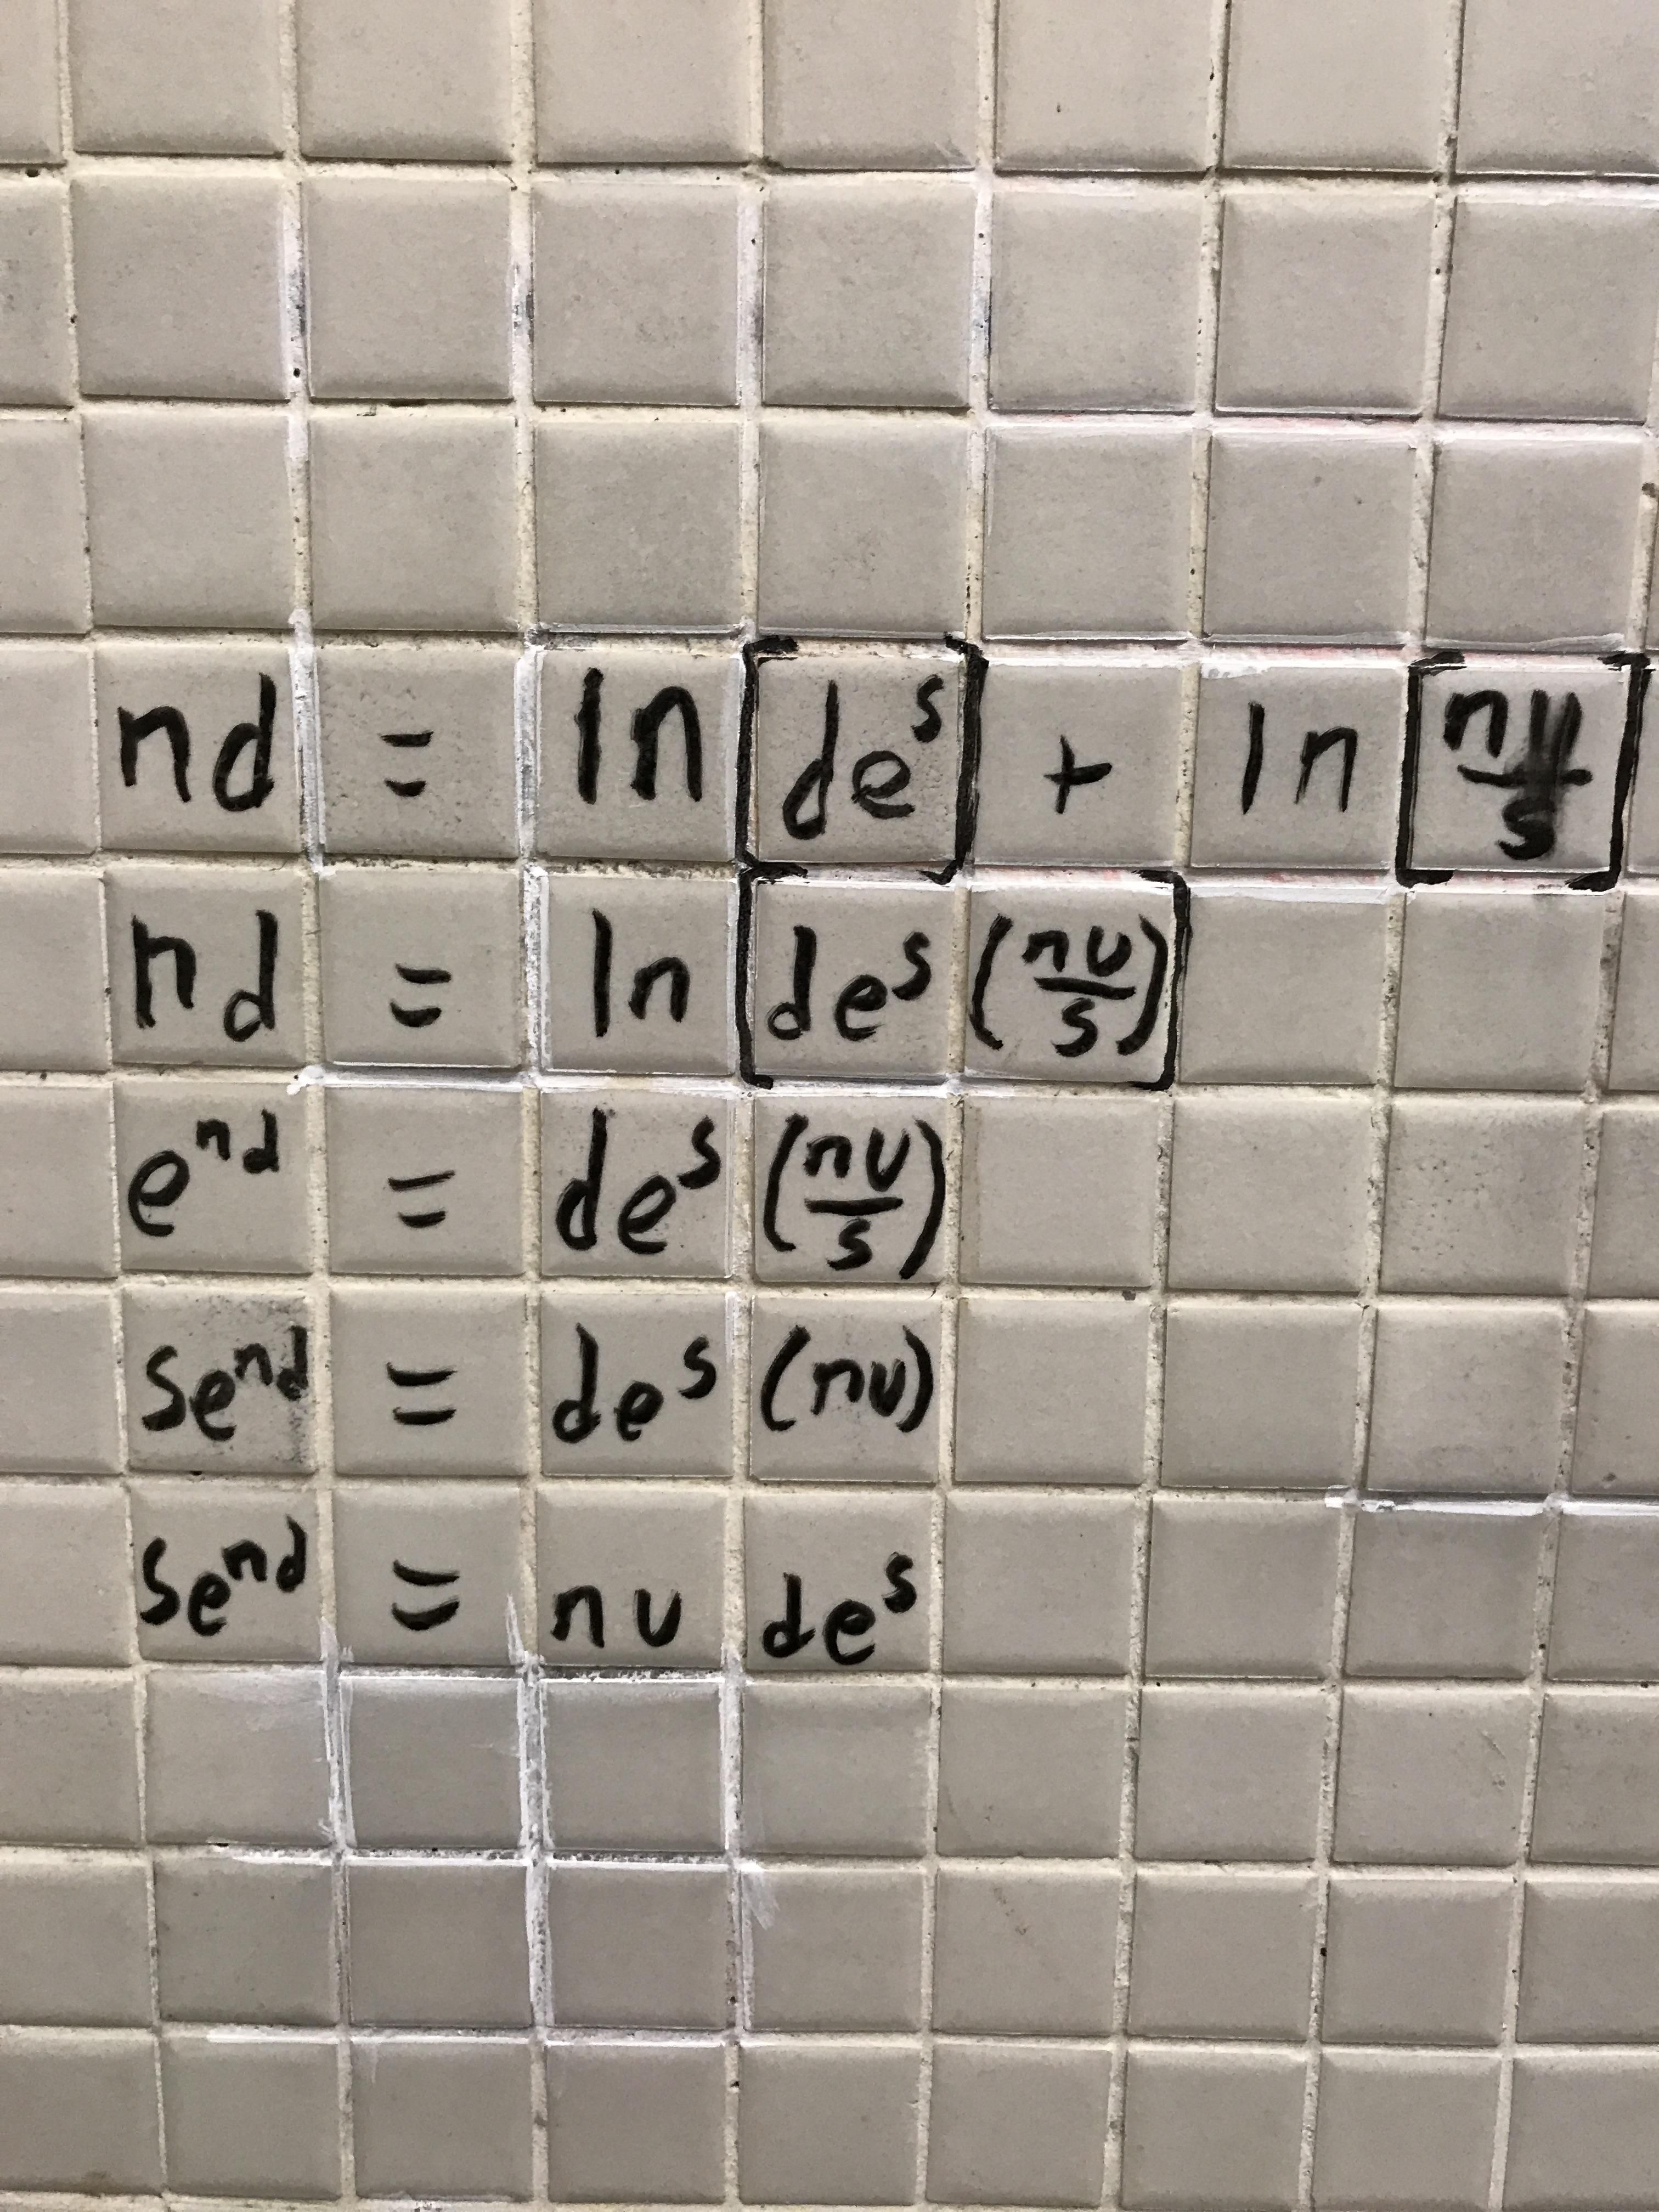 Saw this on a bathroom wall at my university and thought it was pretty funny